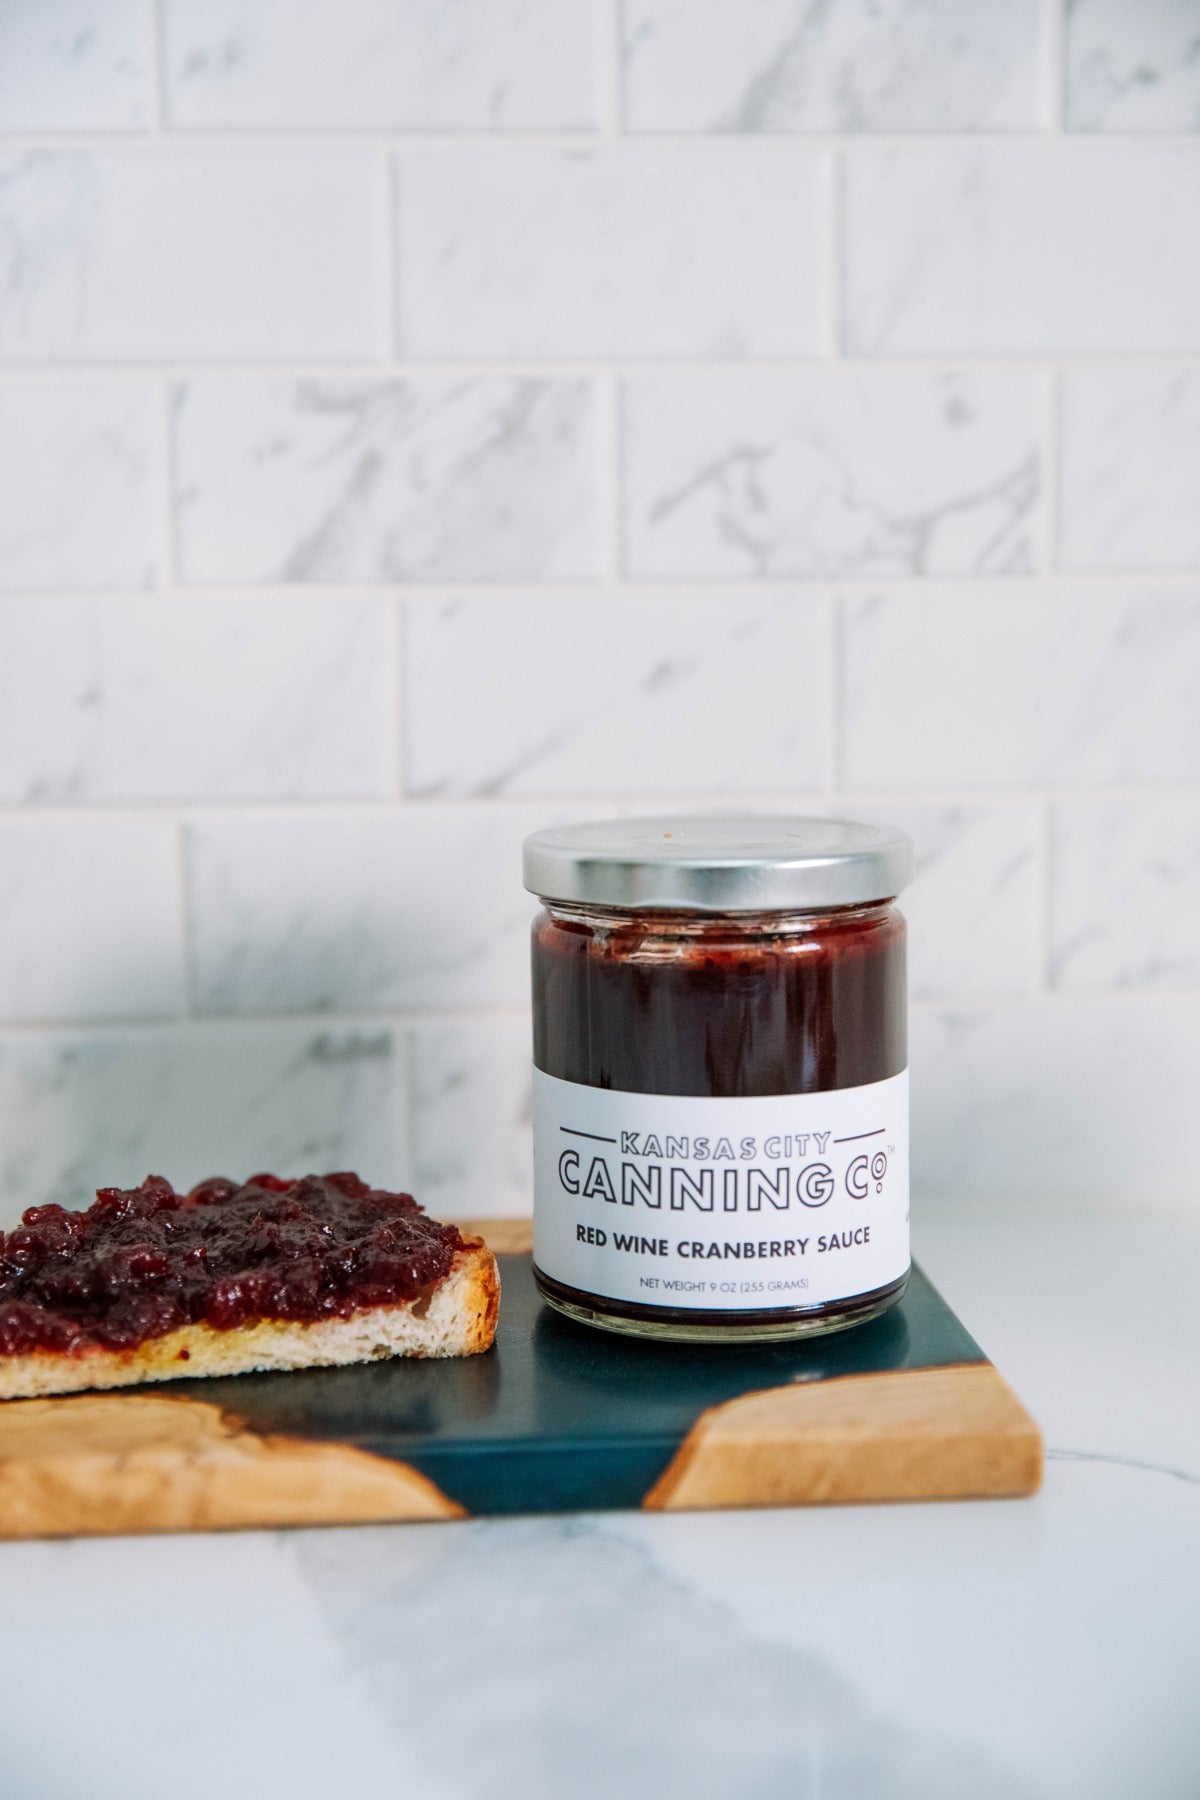 Red Wine Cranberry Sauce - Kansas City Canning Co.